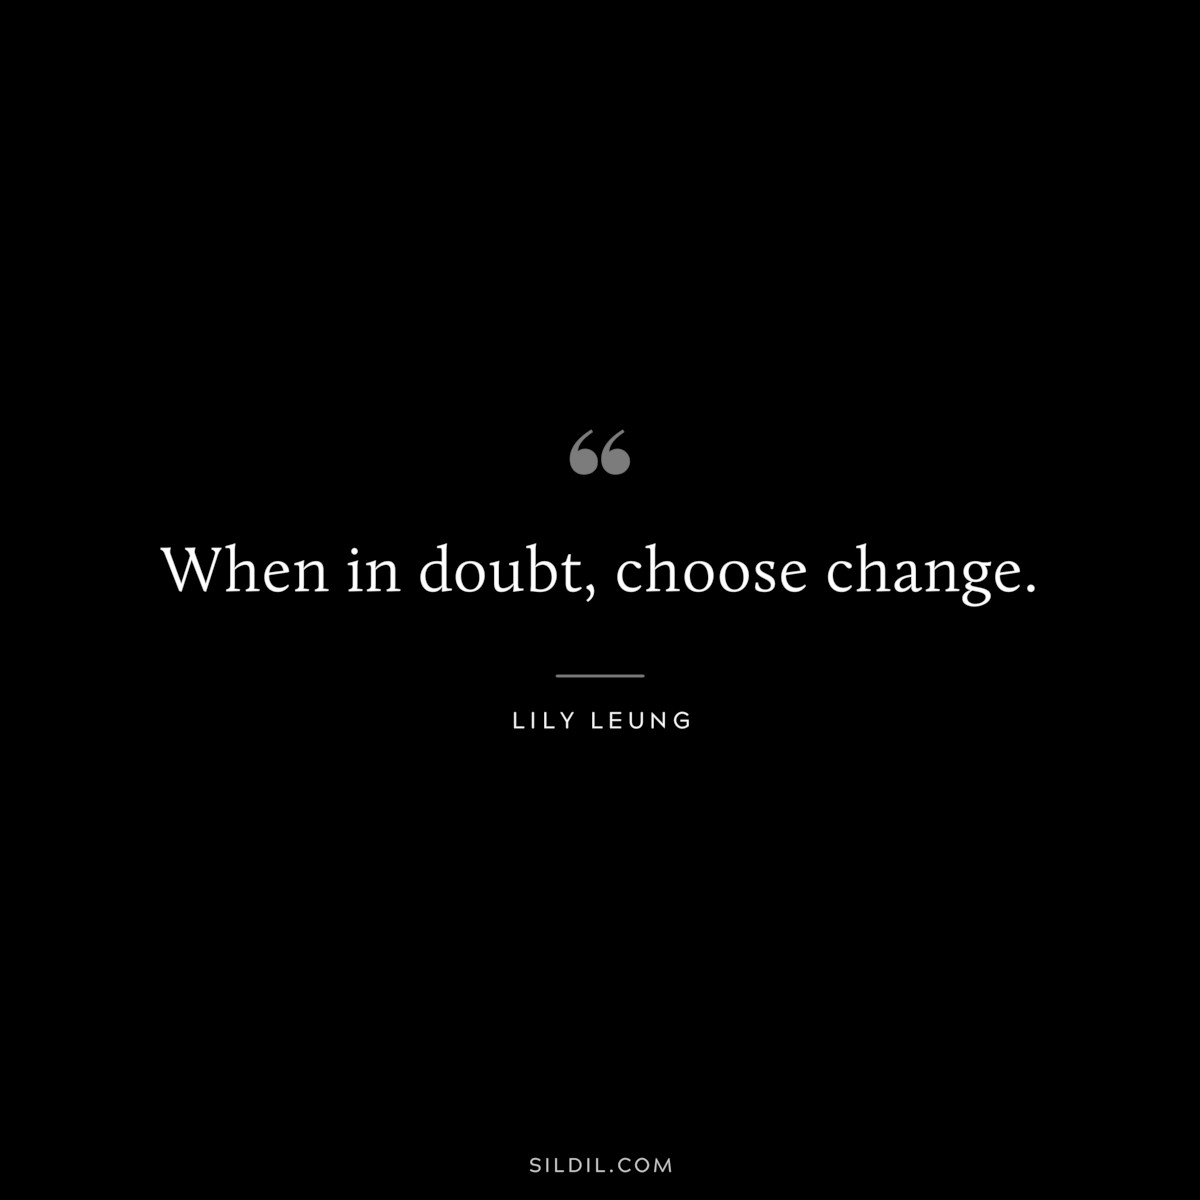 When in doubt, choose change. ― Lily Leung